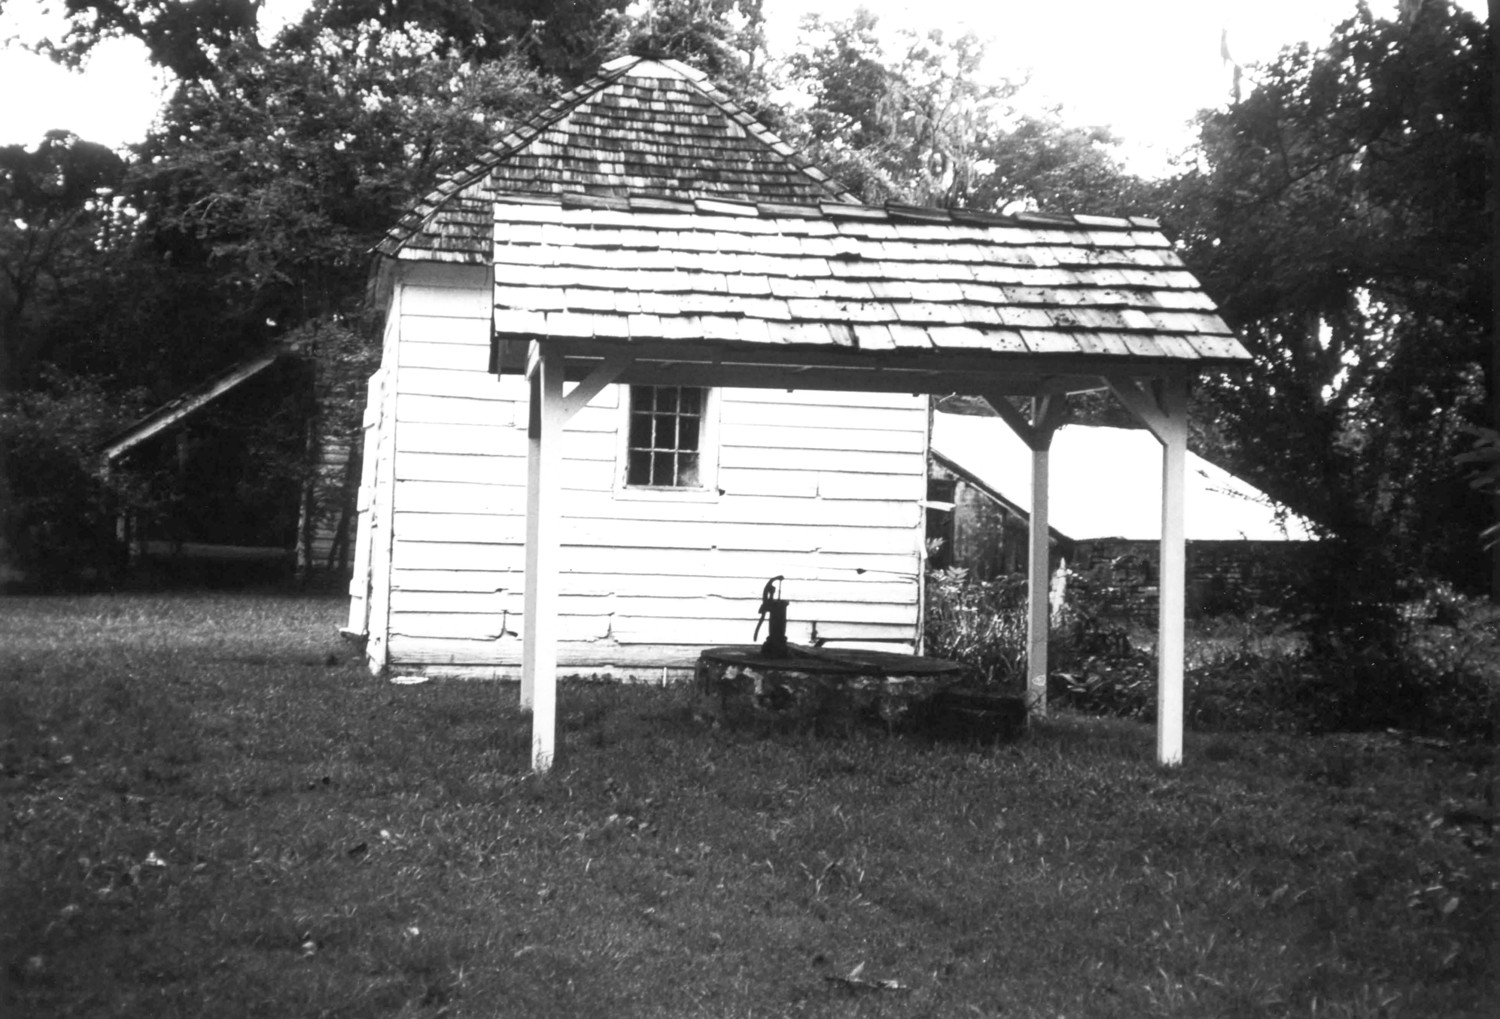 Cottage Plantation, St. Francisville Louisiana Cistern shed:  roof supported by corner posts 10ft square (1973)